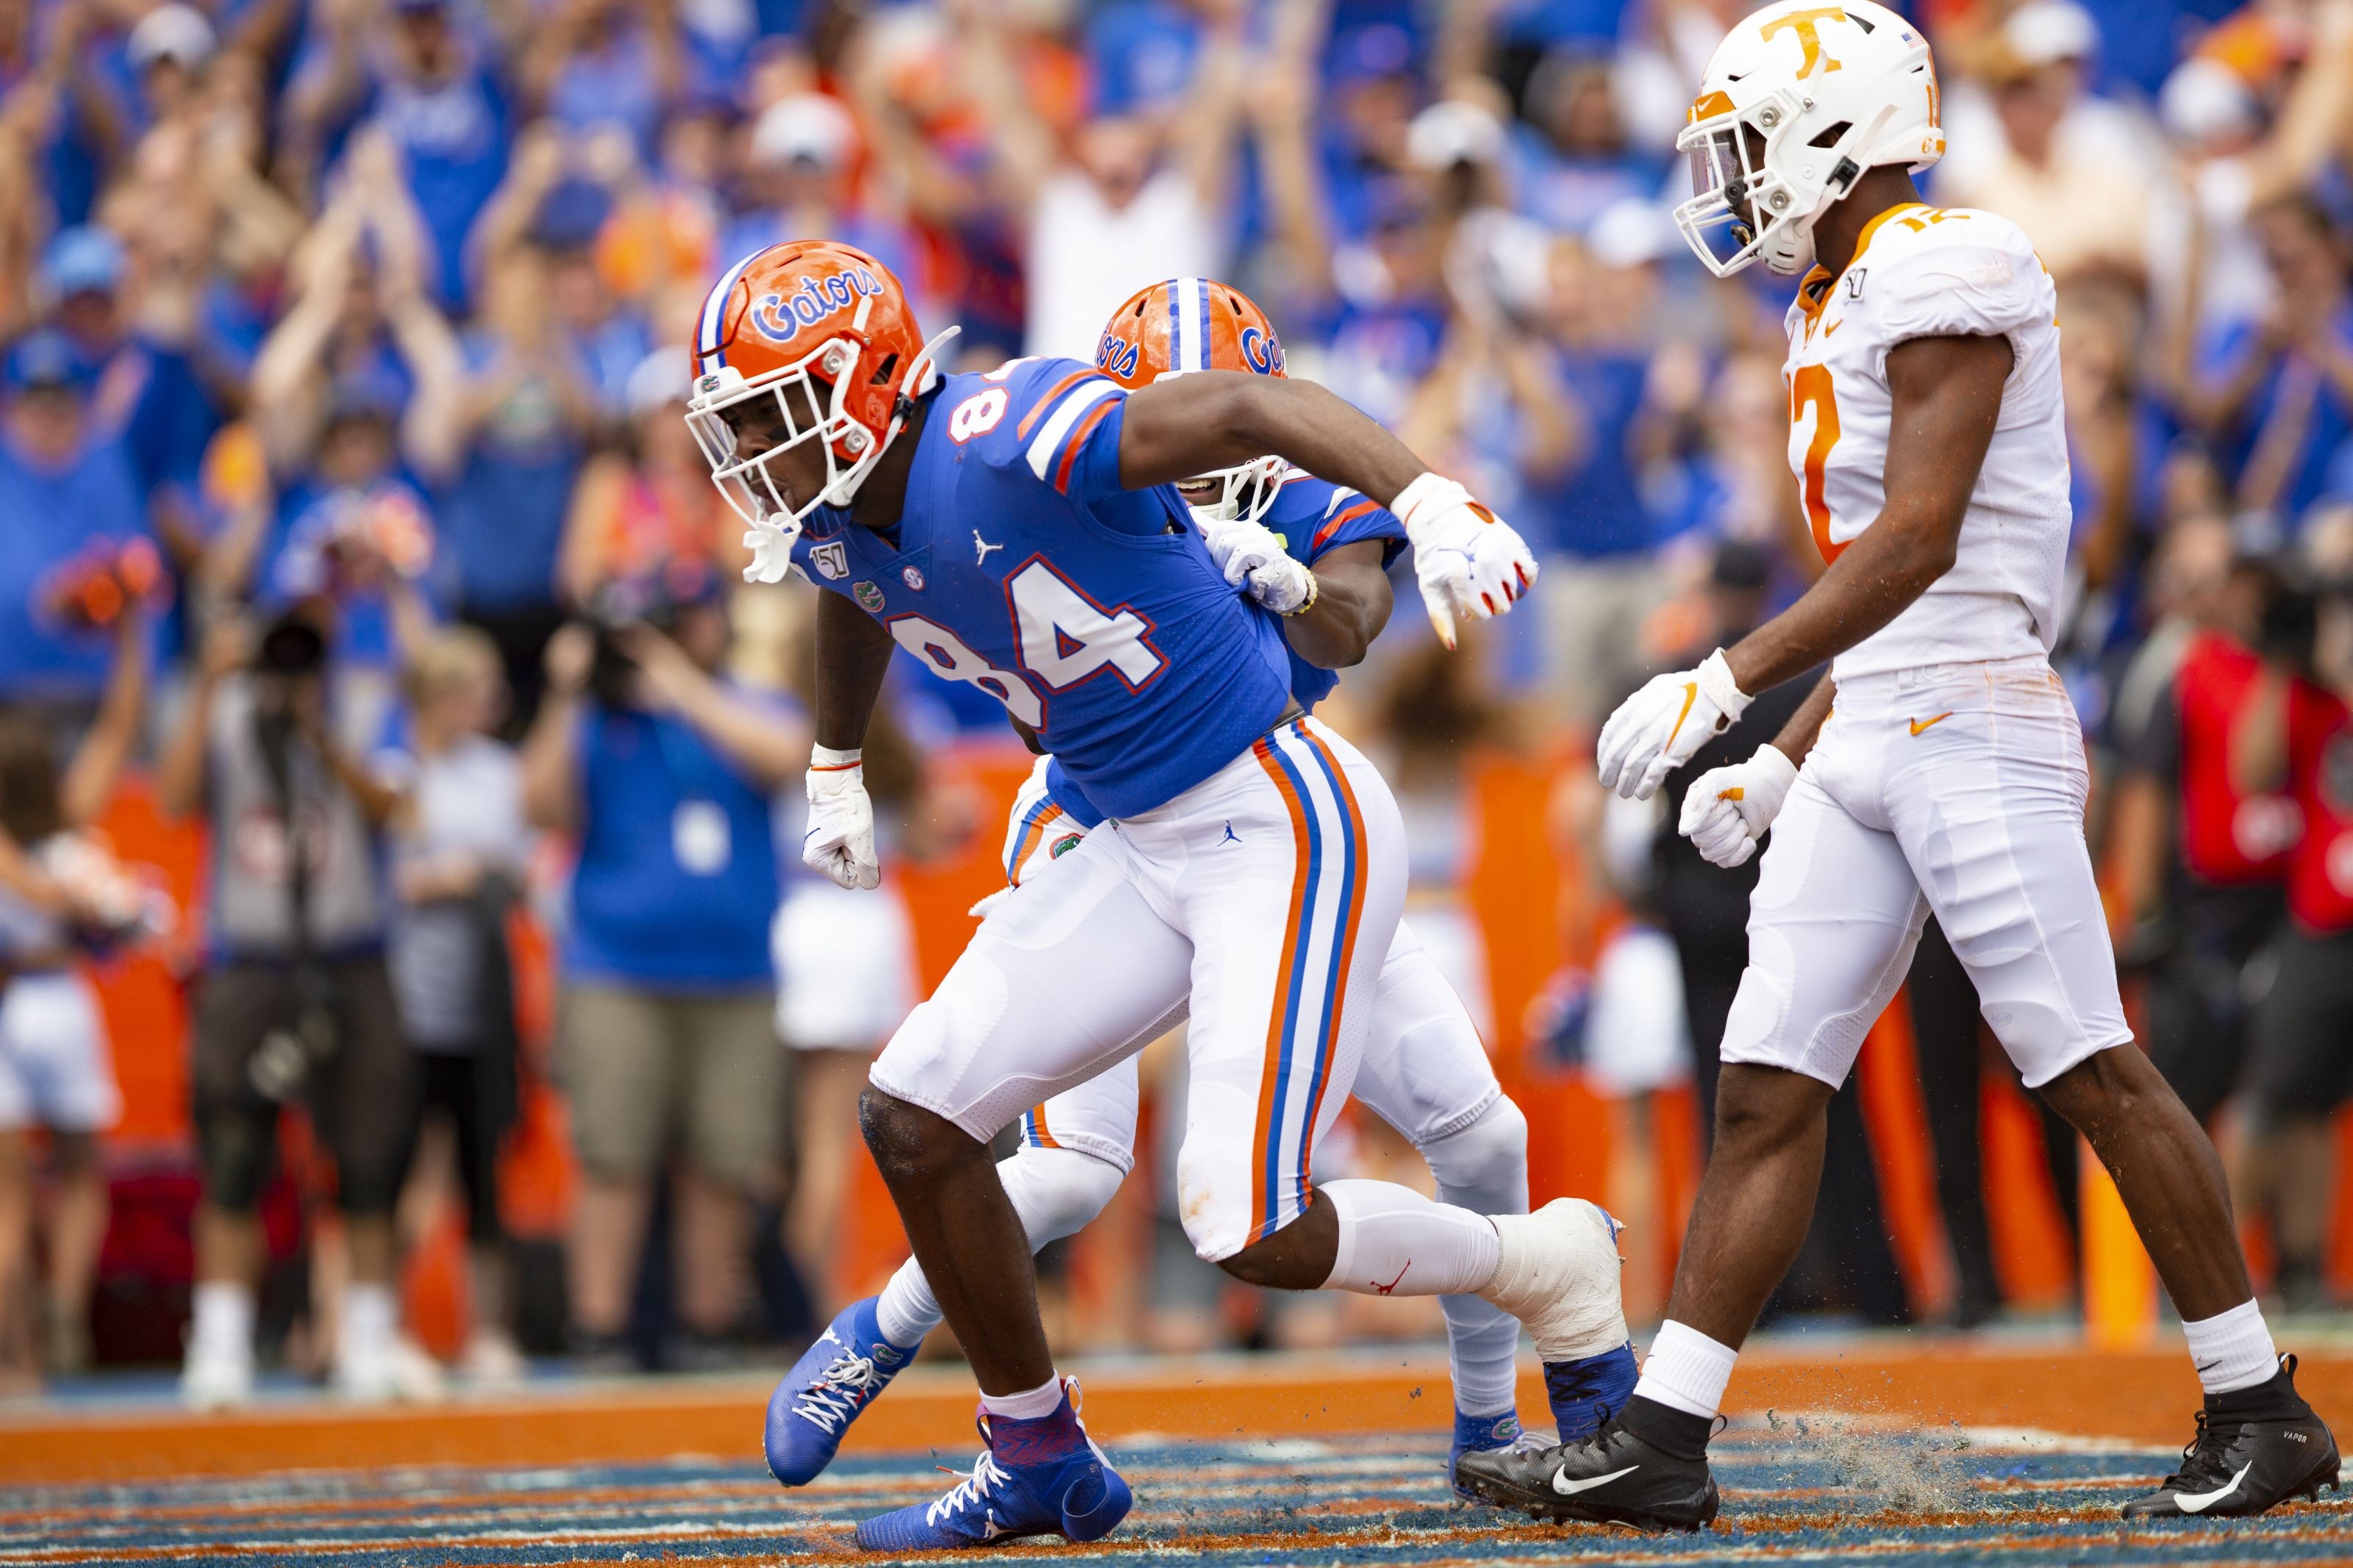 Florida football: Kyle Pitts adds to the Gator tight end legacy